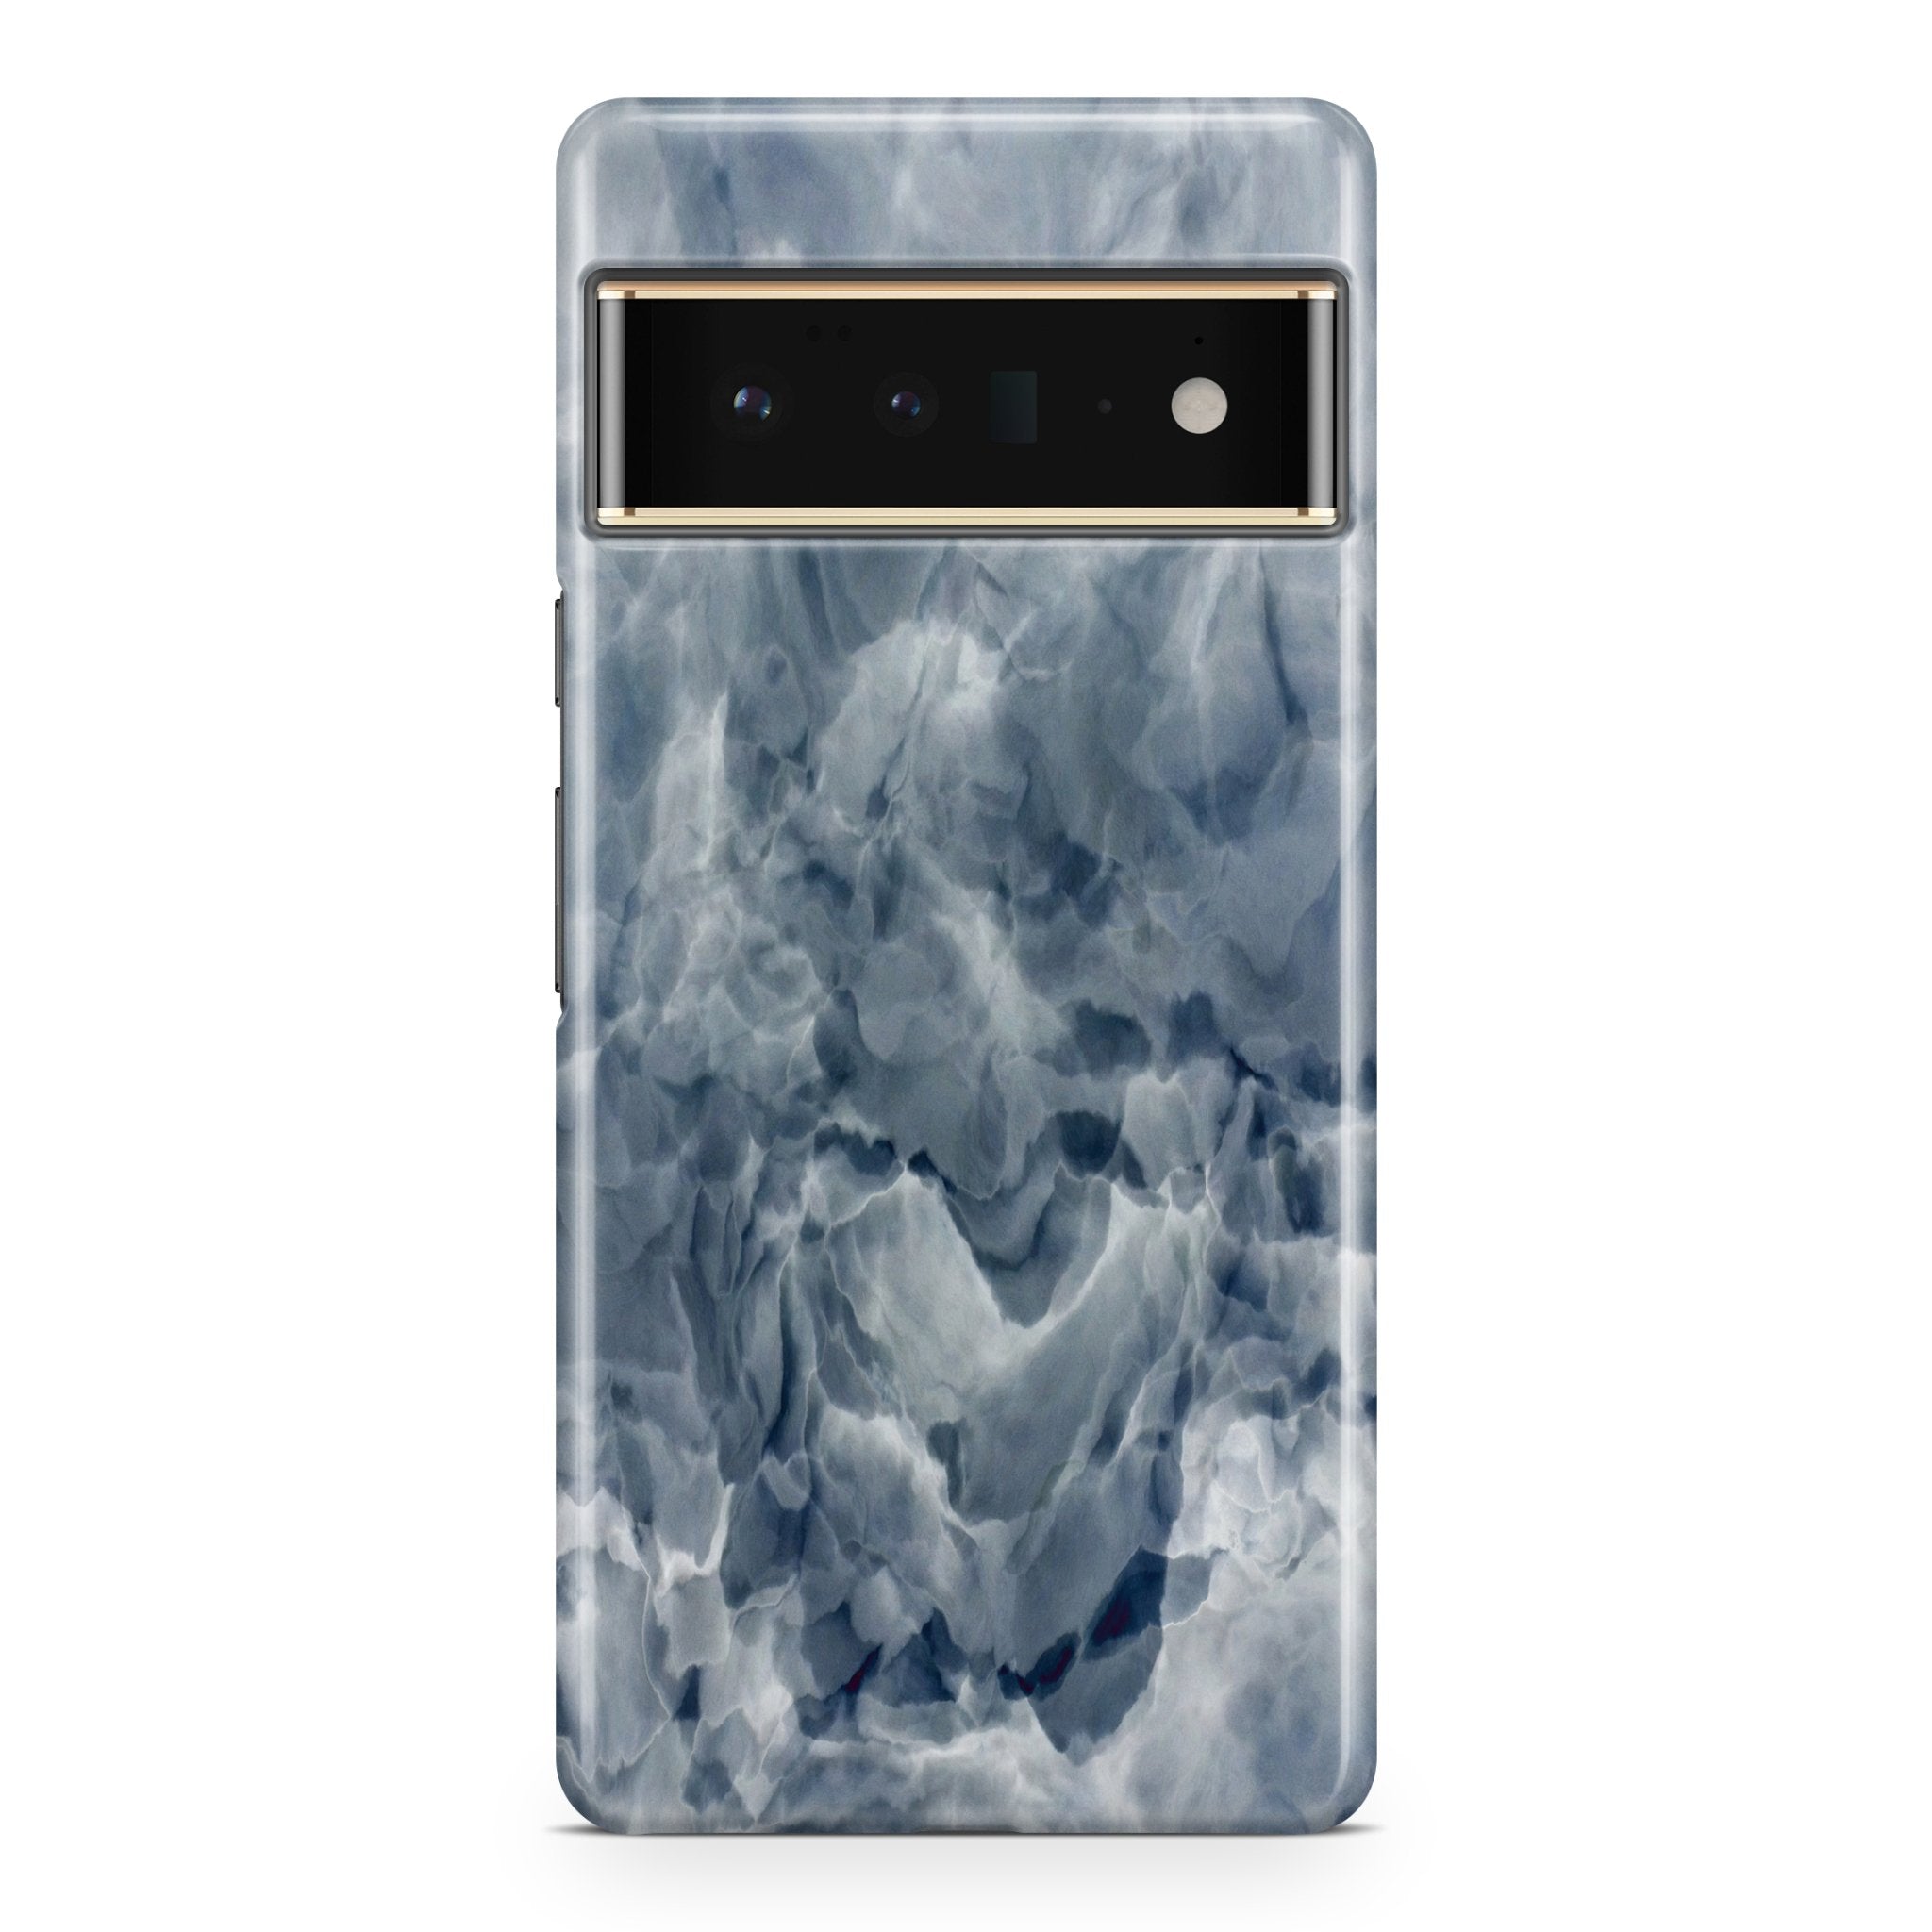 Cerulean Cloud - Google phone case designs by CaseSwagger